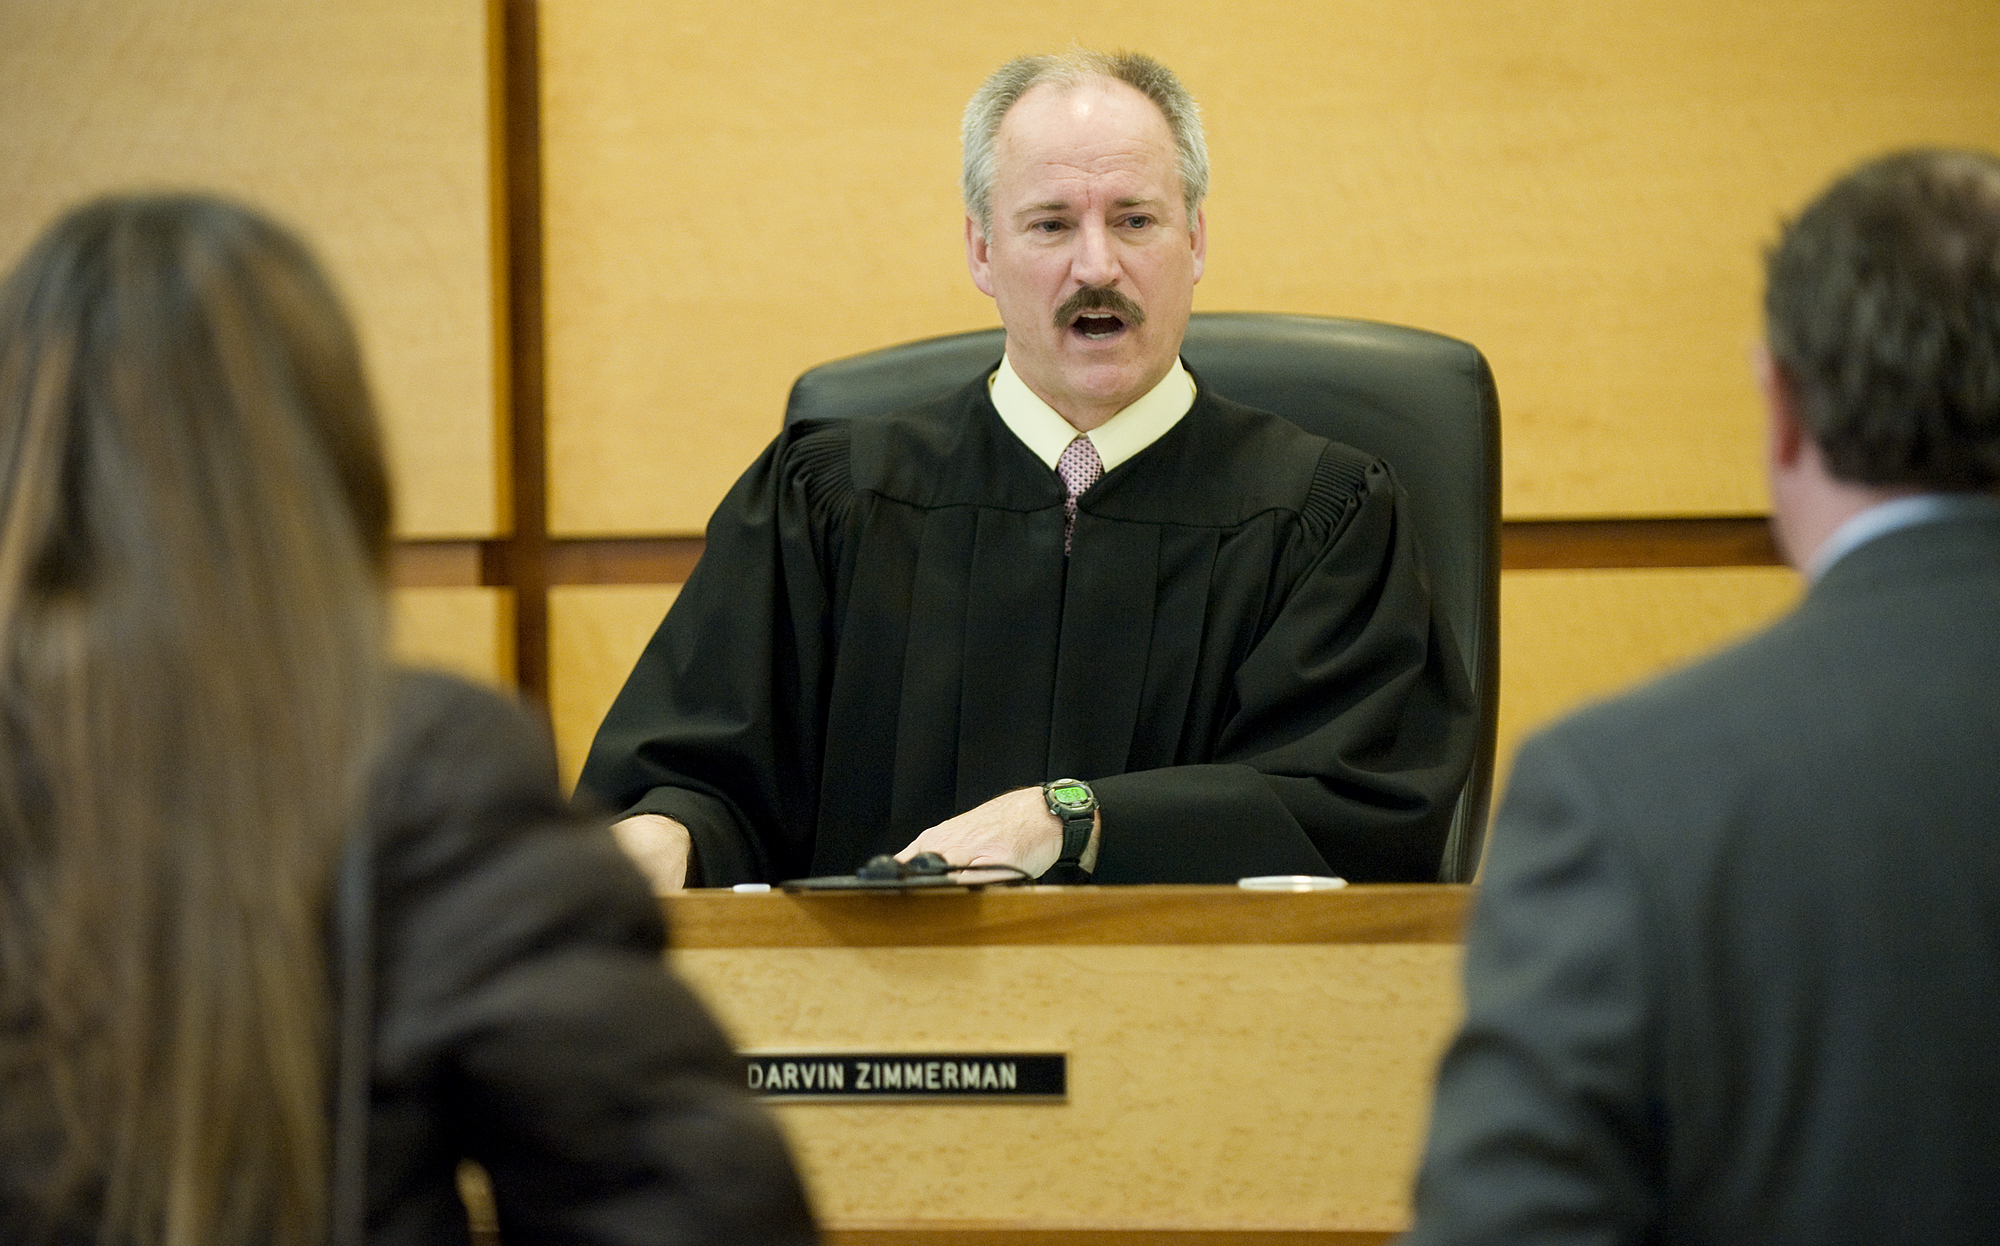 Judge Darvin Zimmerman presides over Mental Health Court in 2010. Zimmerman has been a judge in Clark County for more than 20 years.